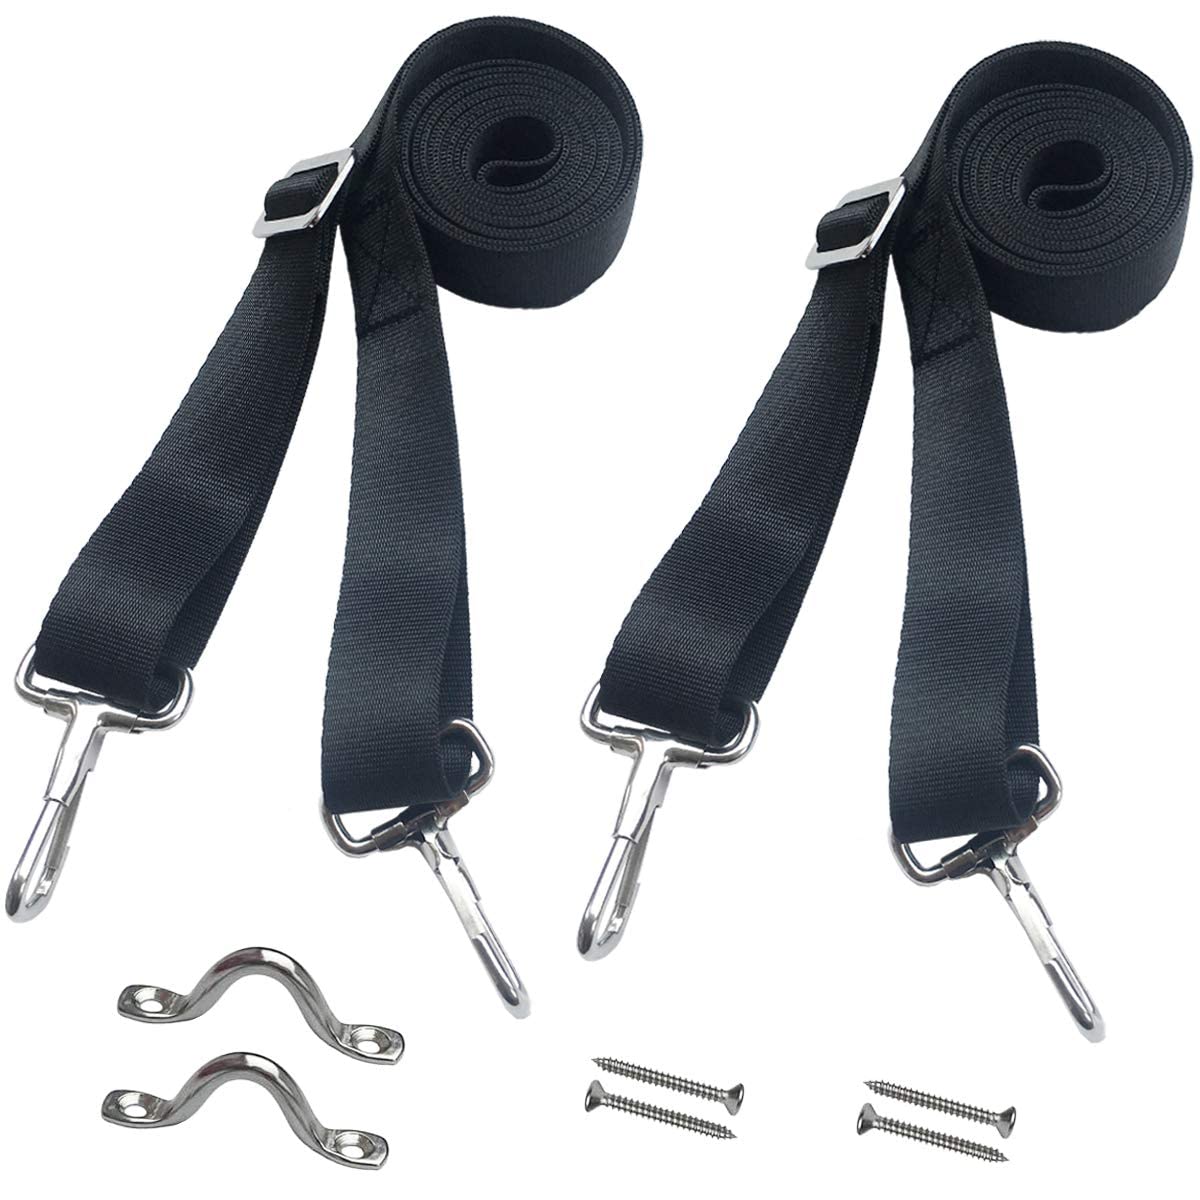 Vtete 2 Pcs Adjustable Bimini Top Straps with All 2 Snap Hooks on Each End  (Not Need to Sewn It) - Marine & Awning Webbing Straps with Loops + Eye  Straps 